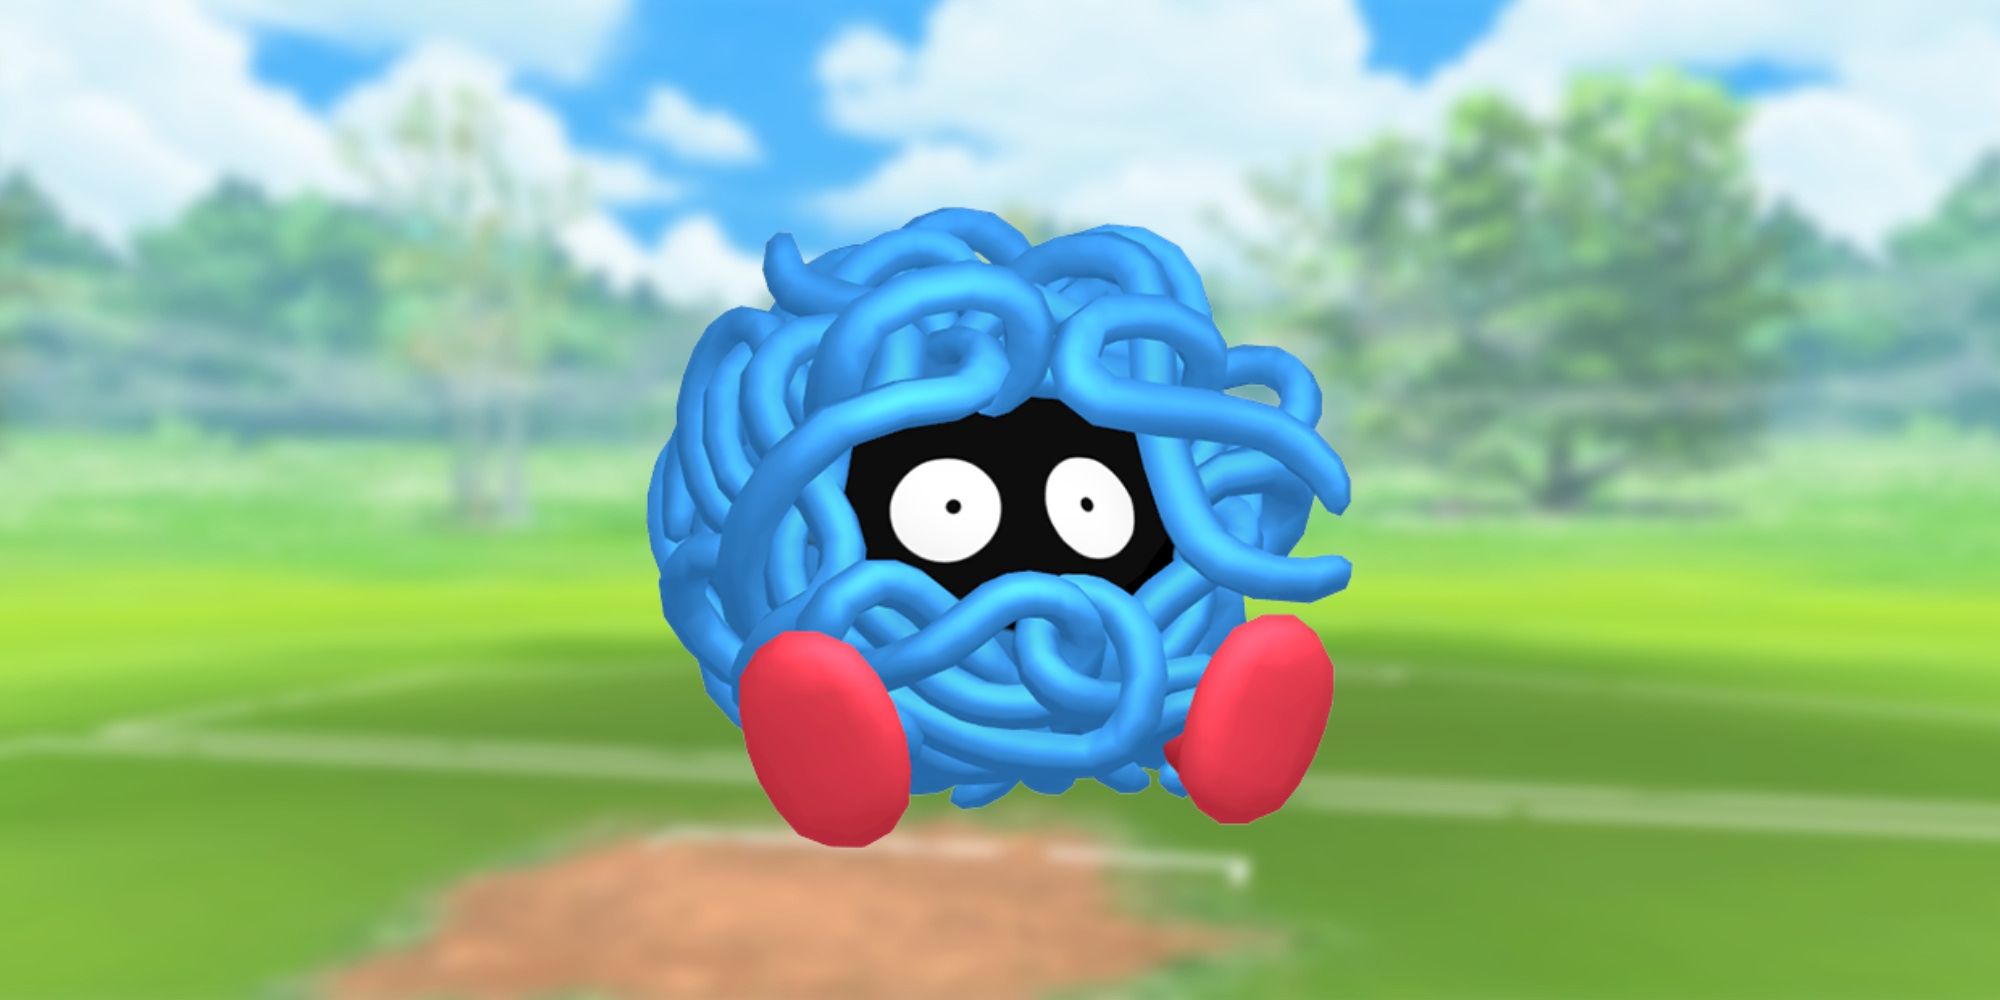 Tangela from Pokemon with the Pokemon Go battlefield as the background